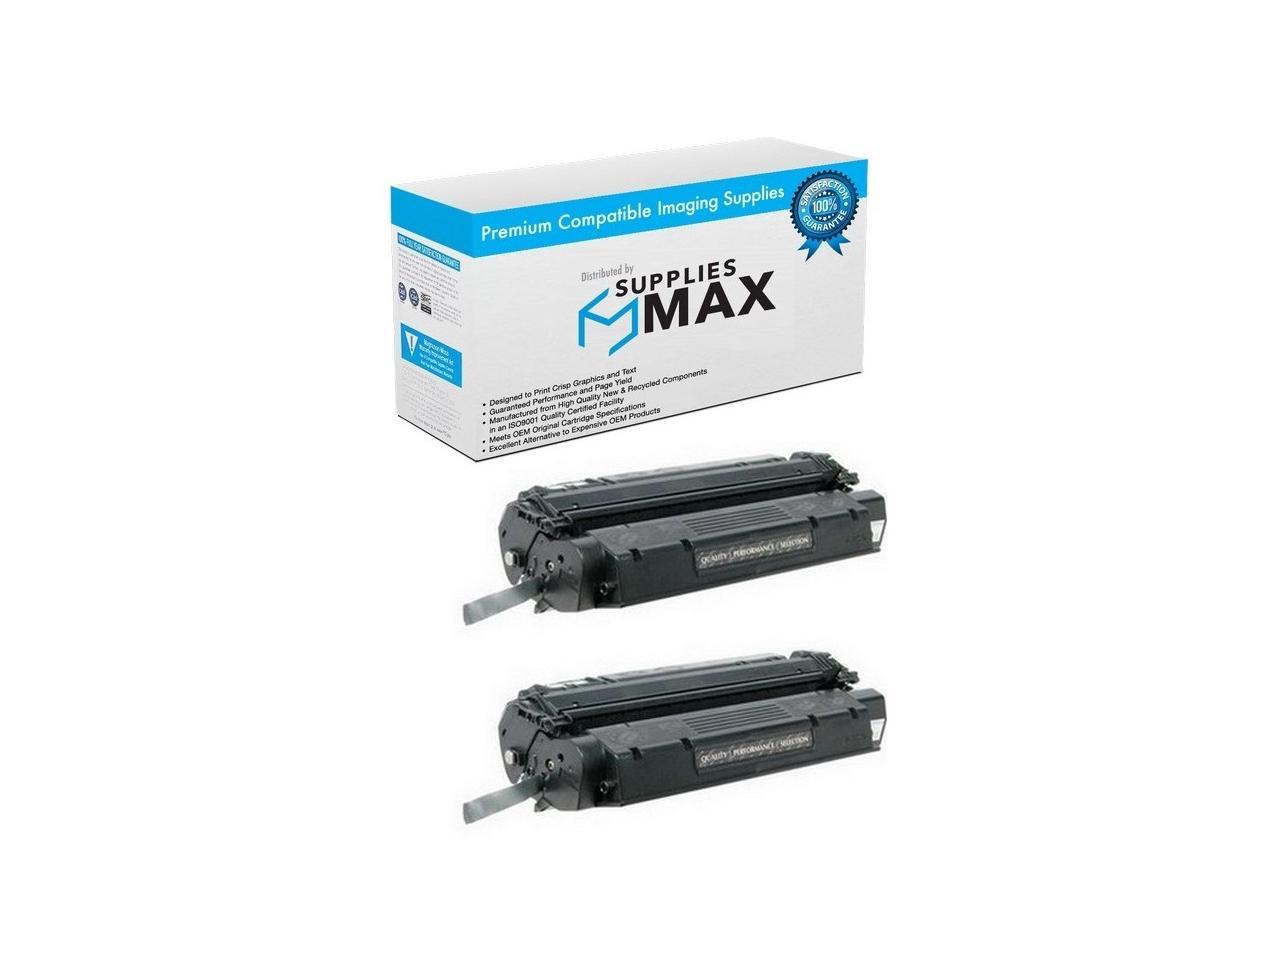 Laser Printer Cartridge use for HP Laserjet Pro 1300 1300N 1300XI Printer Black Q2613X Compatible High Yield Color Printer Toner Replacement for HP 13X 8-Pack